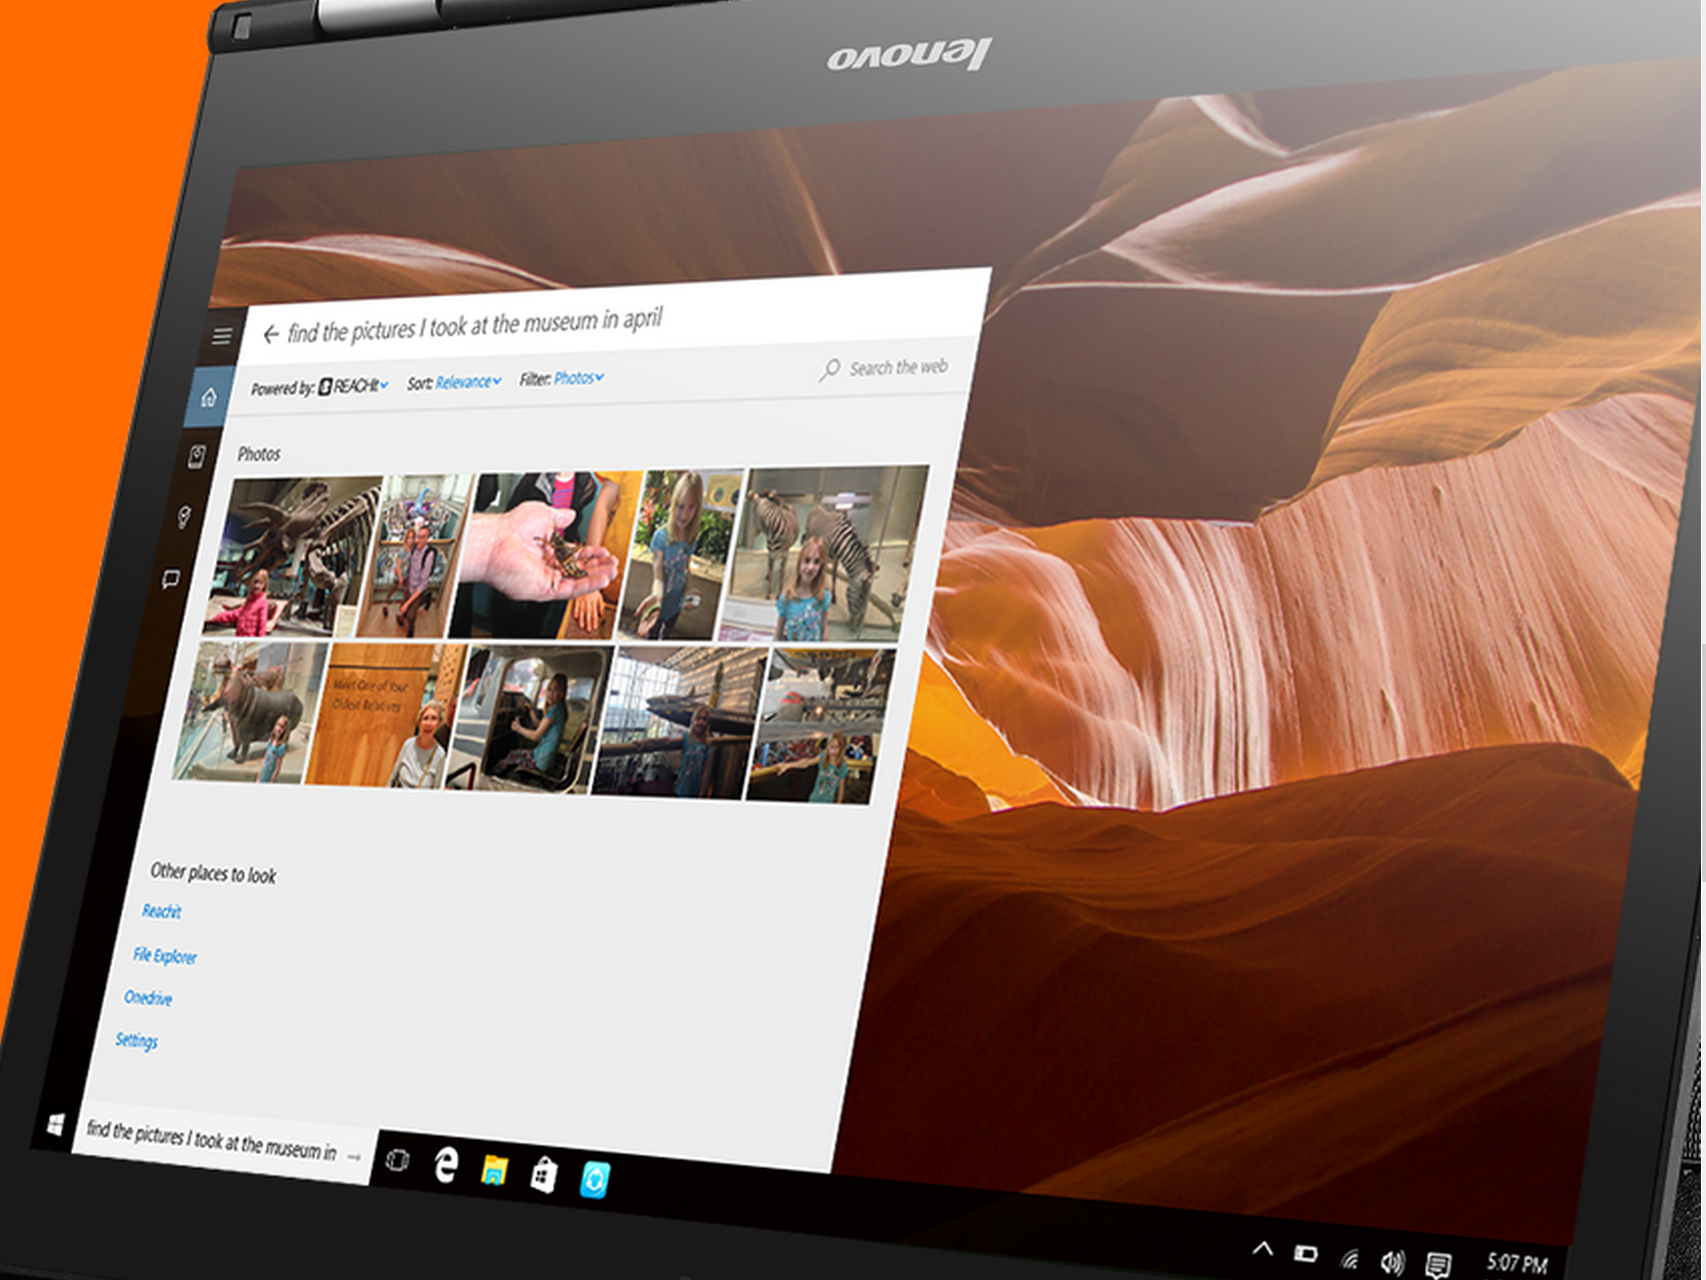 Lenovo details Companion and Settings apps that will be preloaded on its Windows 10 PCs